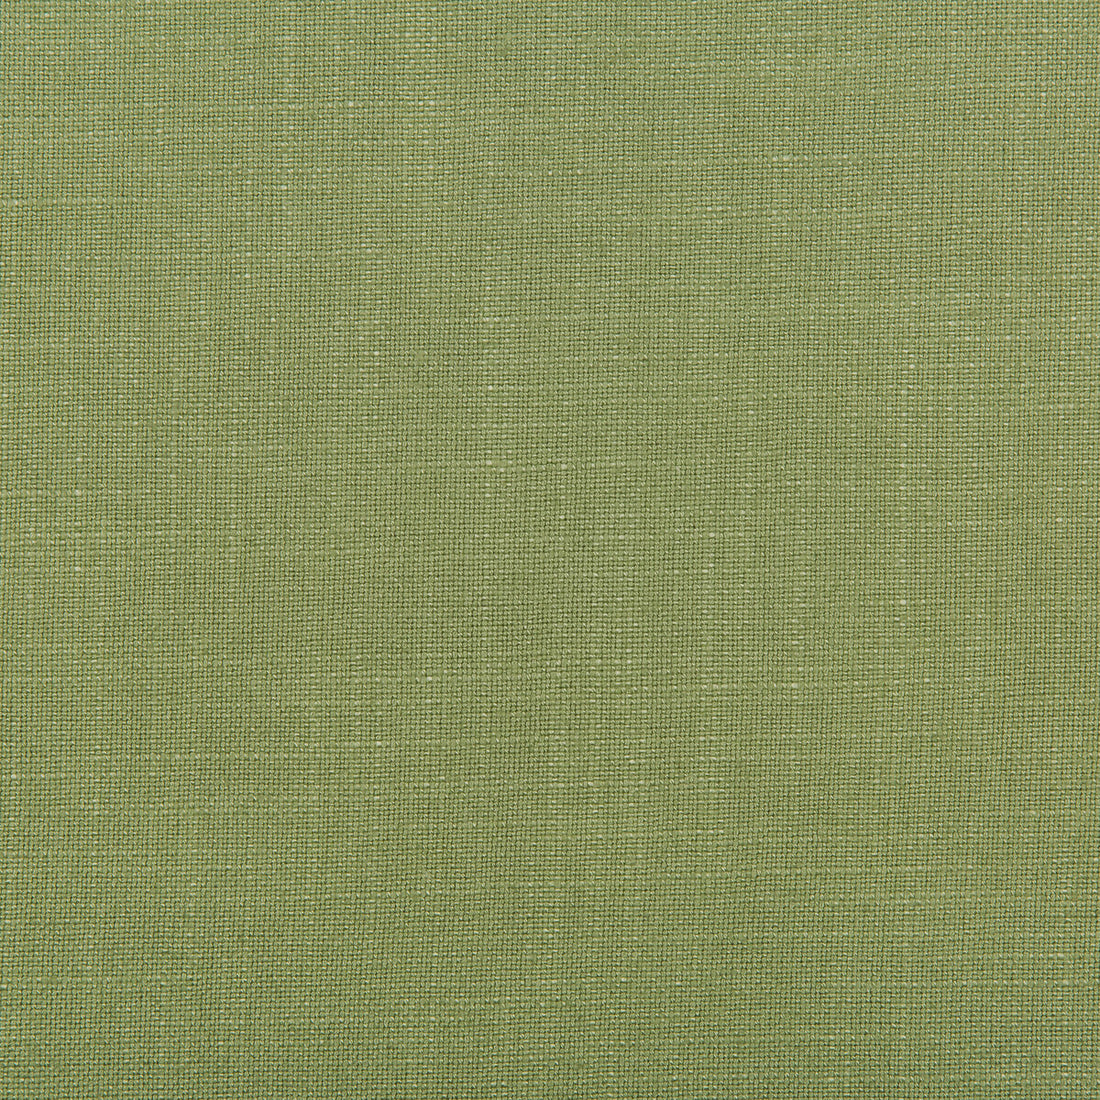 Aura fabric in wasabi color - pattern 35520.23.0 - by Kravet Design